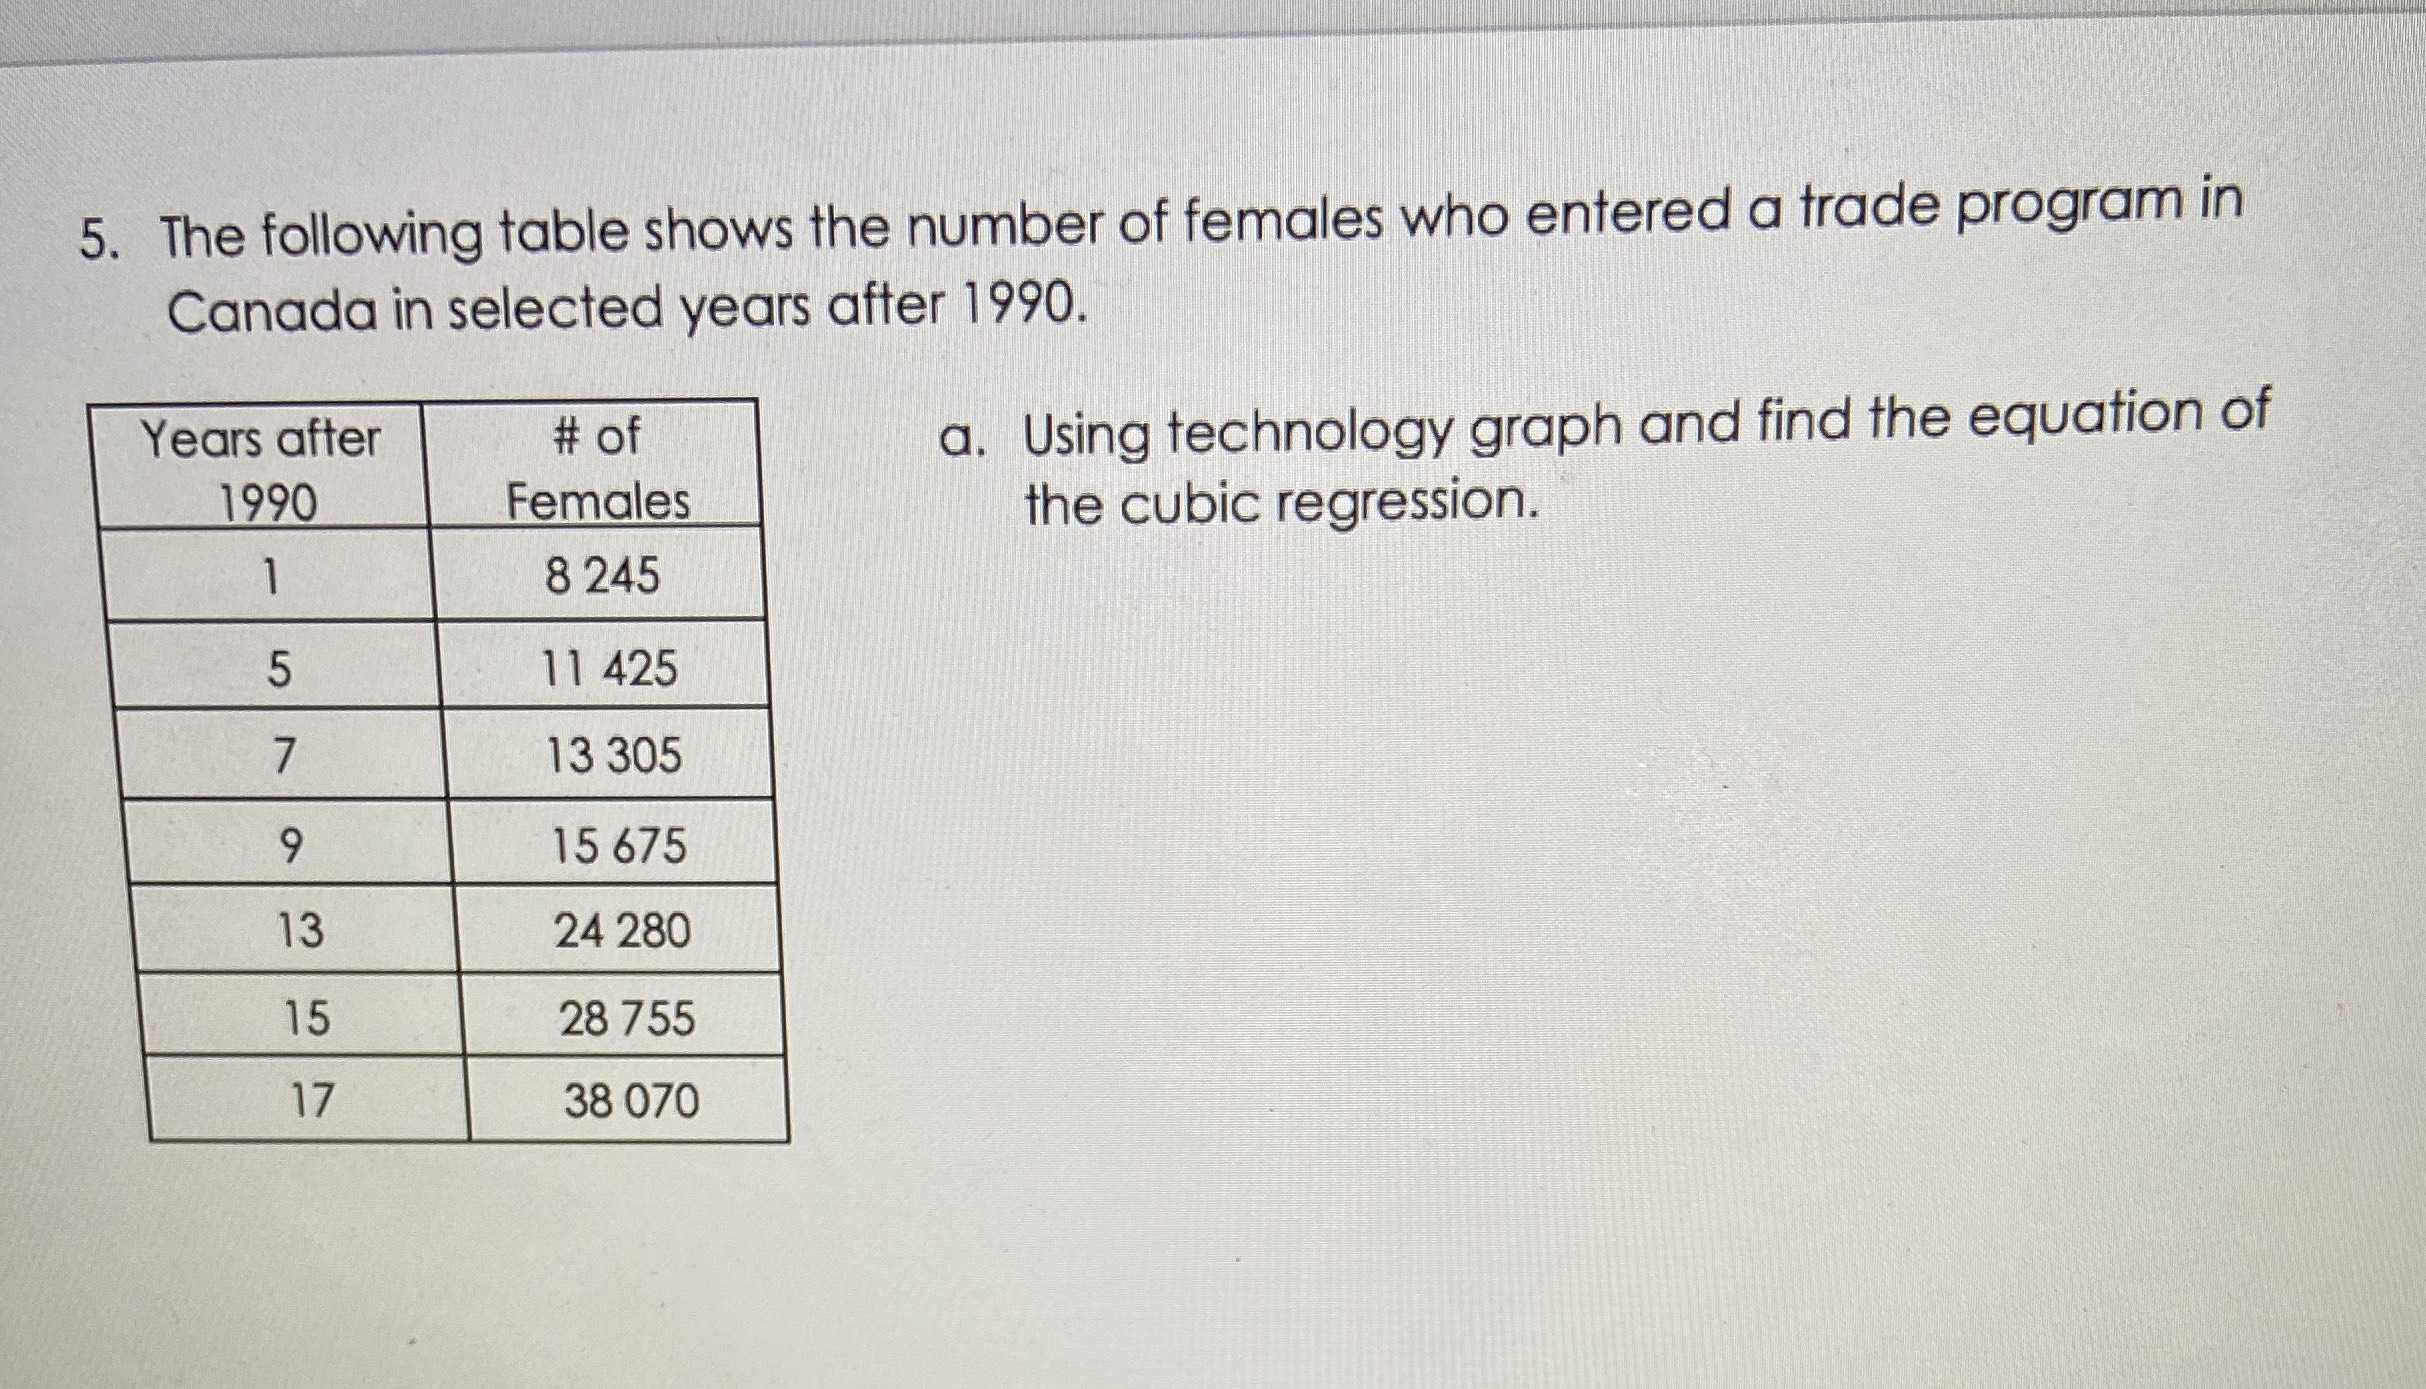 5. The following table shows the number of females...